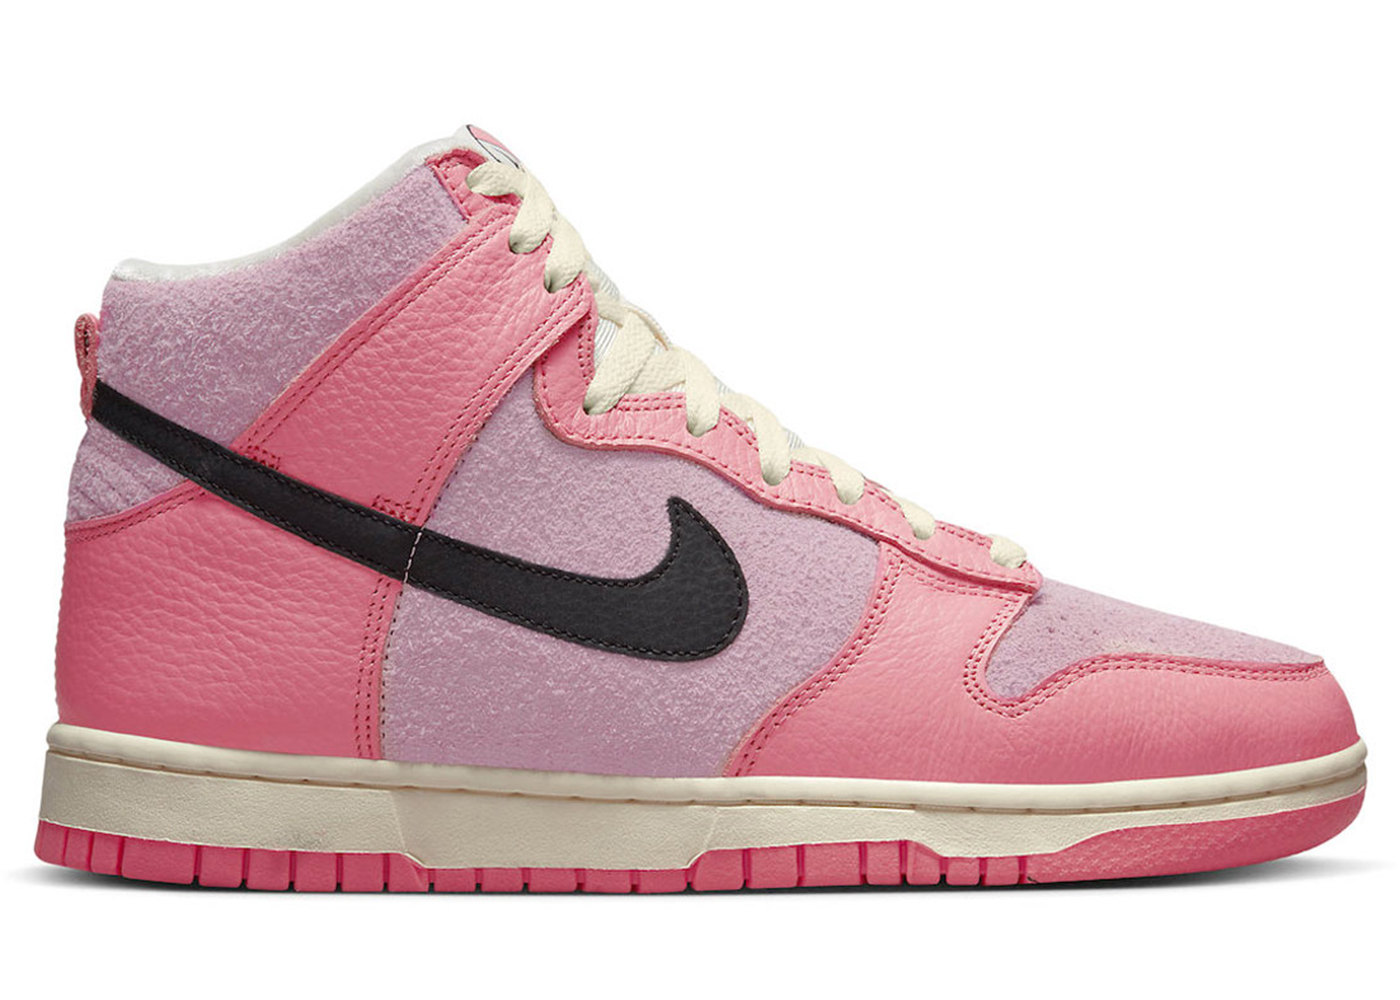 Nike Dunk High Hoops Pack Pink (Women's) - DX3359-600 - GB